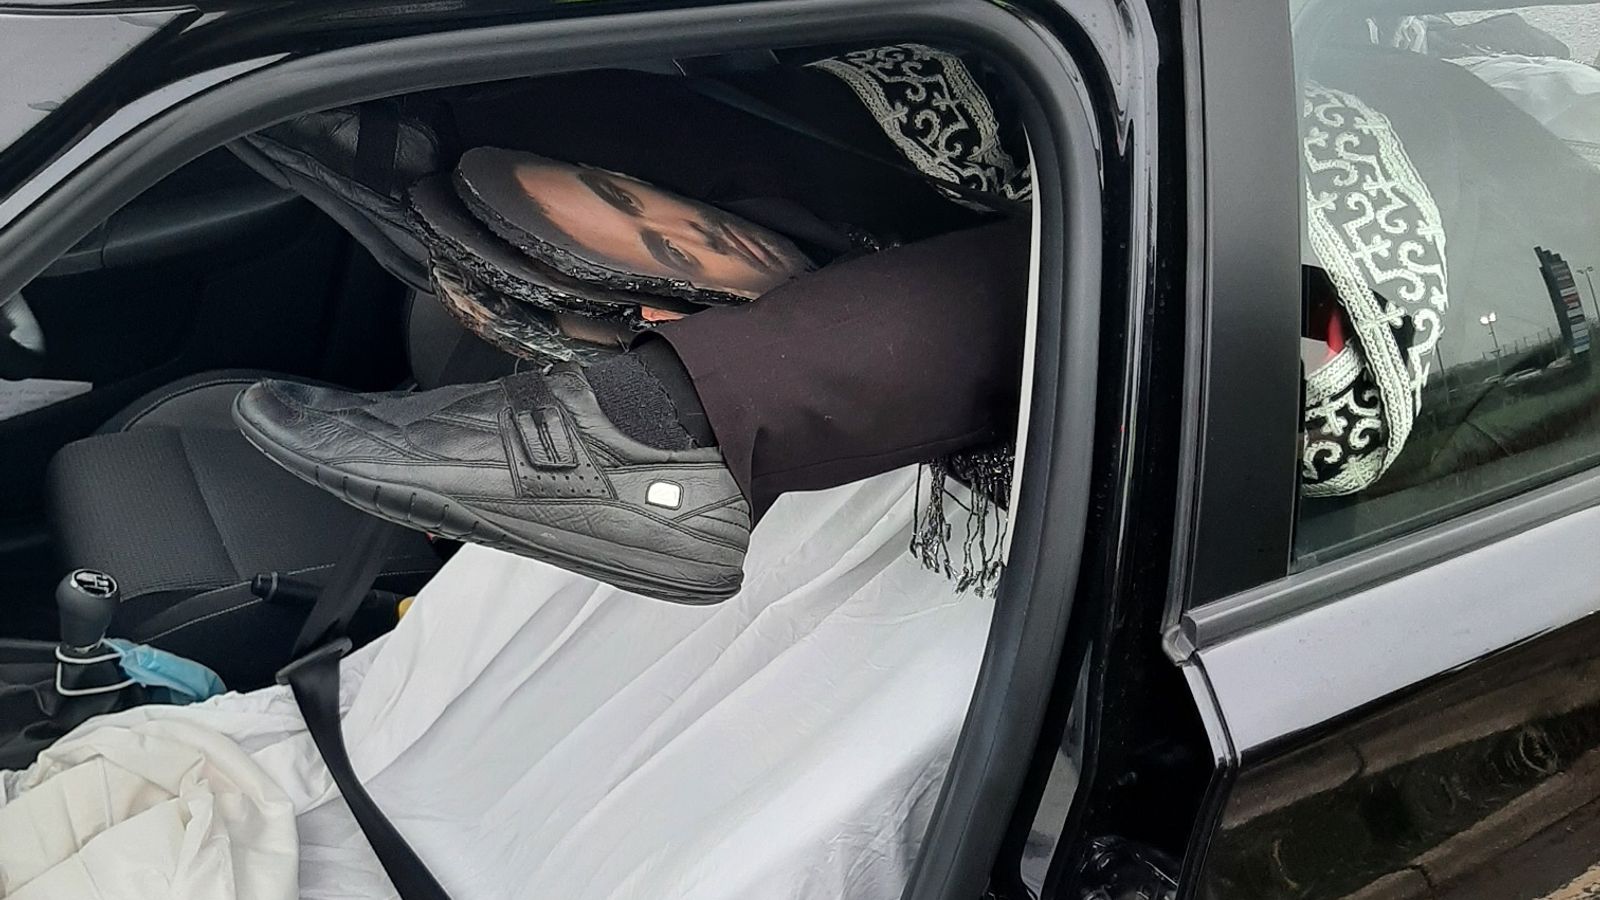 Prince Charming mannequin mistaken for ‘body rolled up in carpet’ on motorway